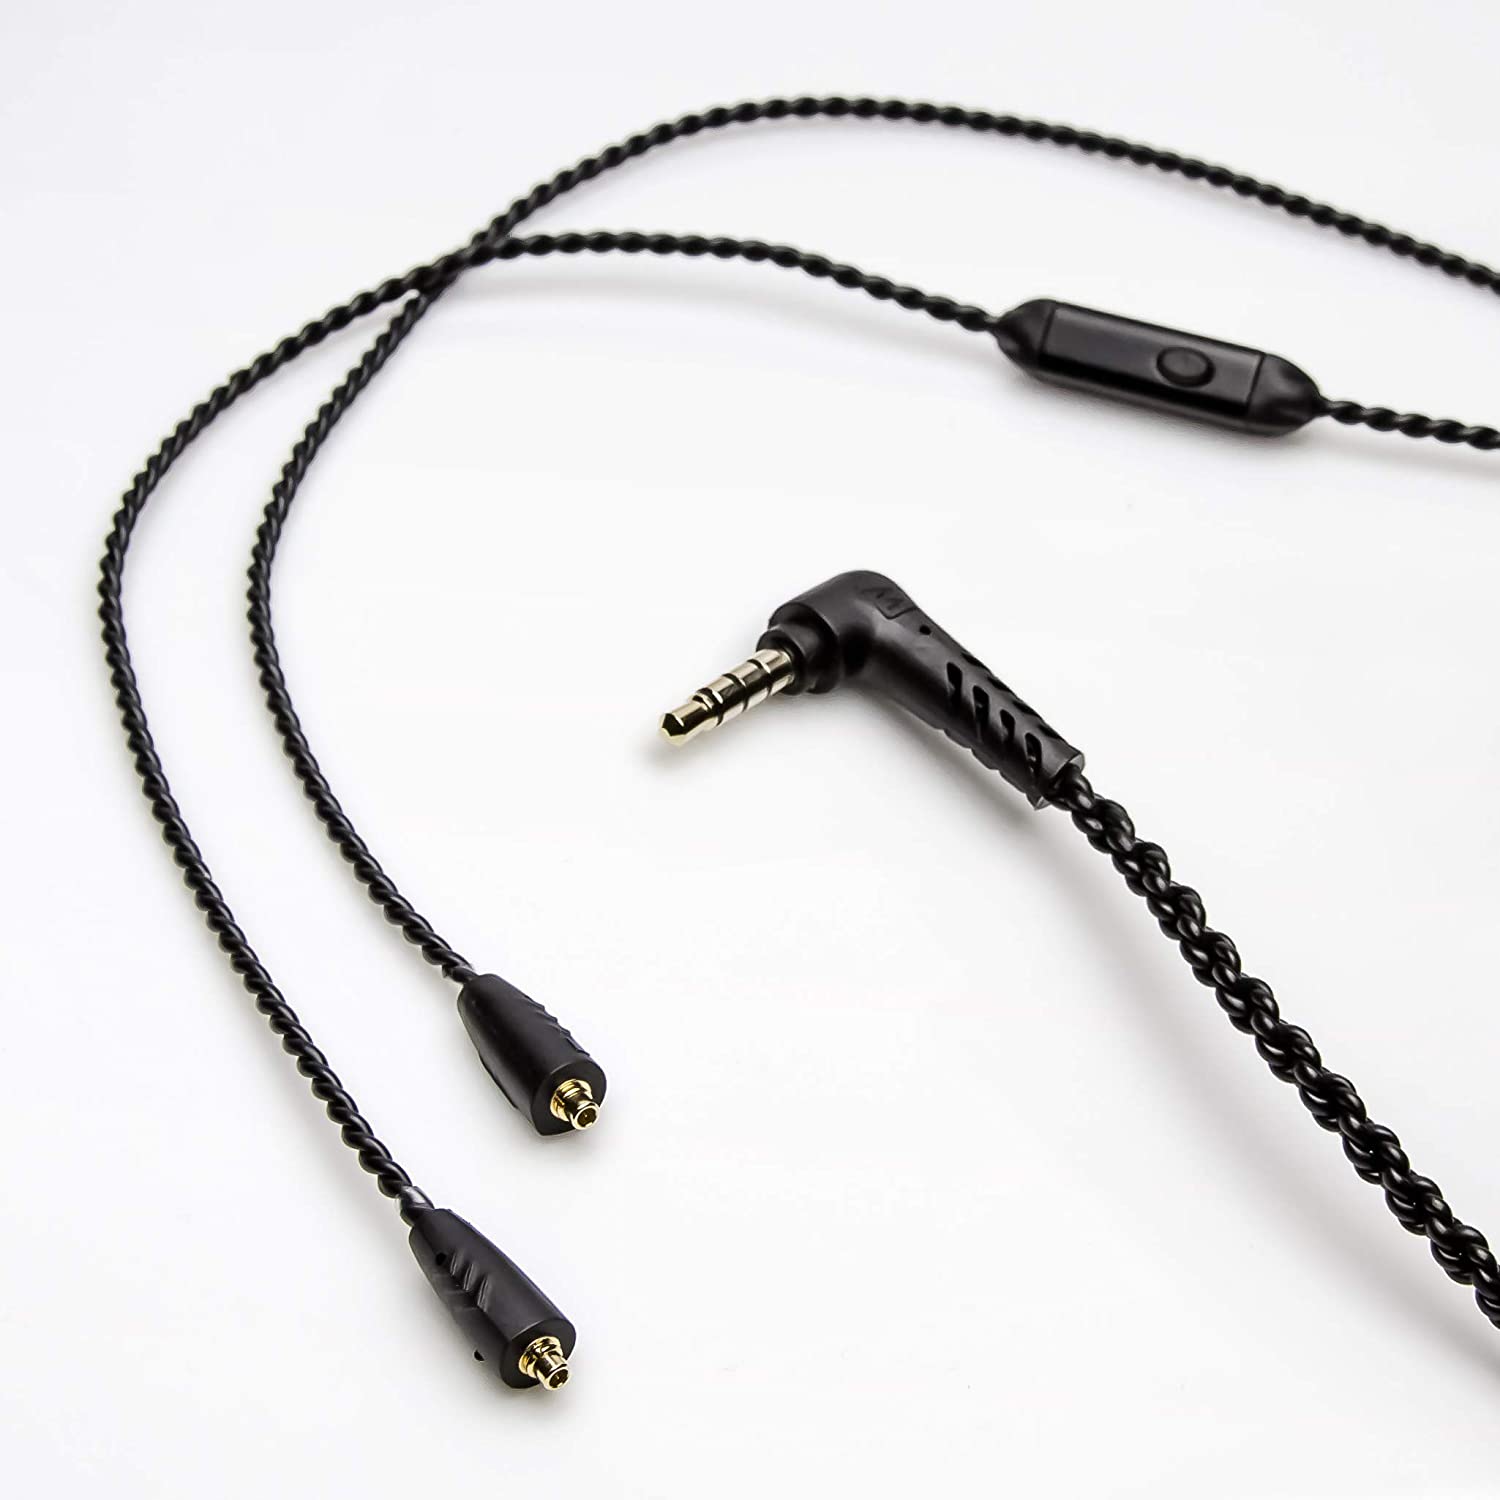 MMCX Replacement Headset Cable